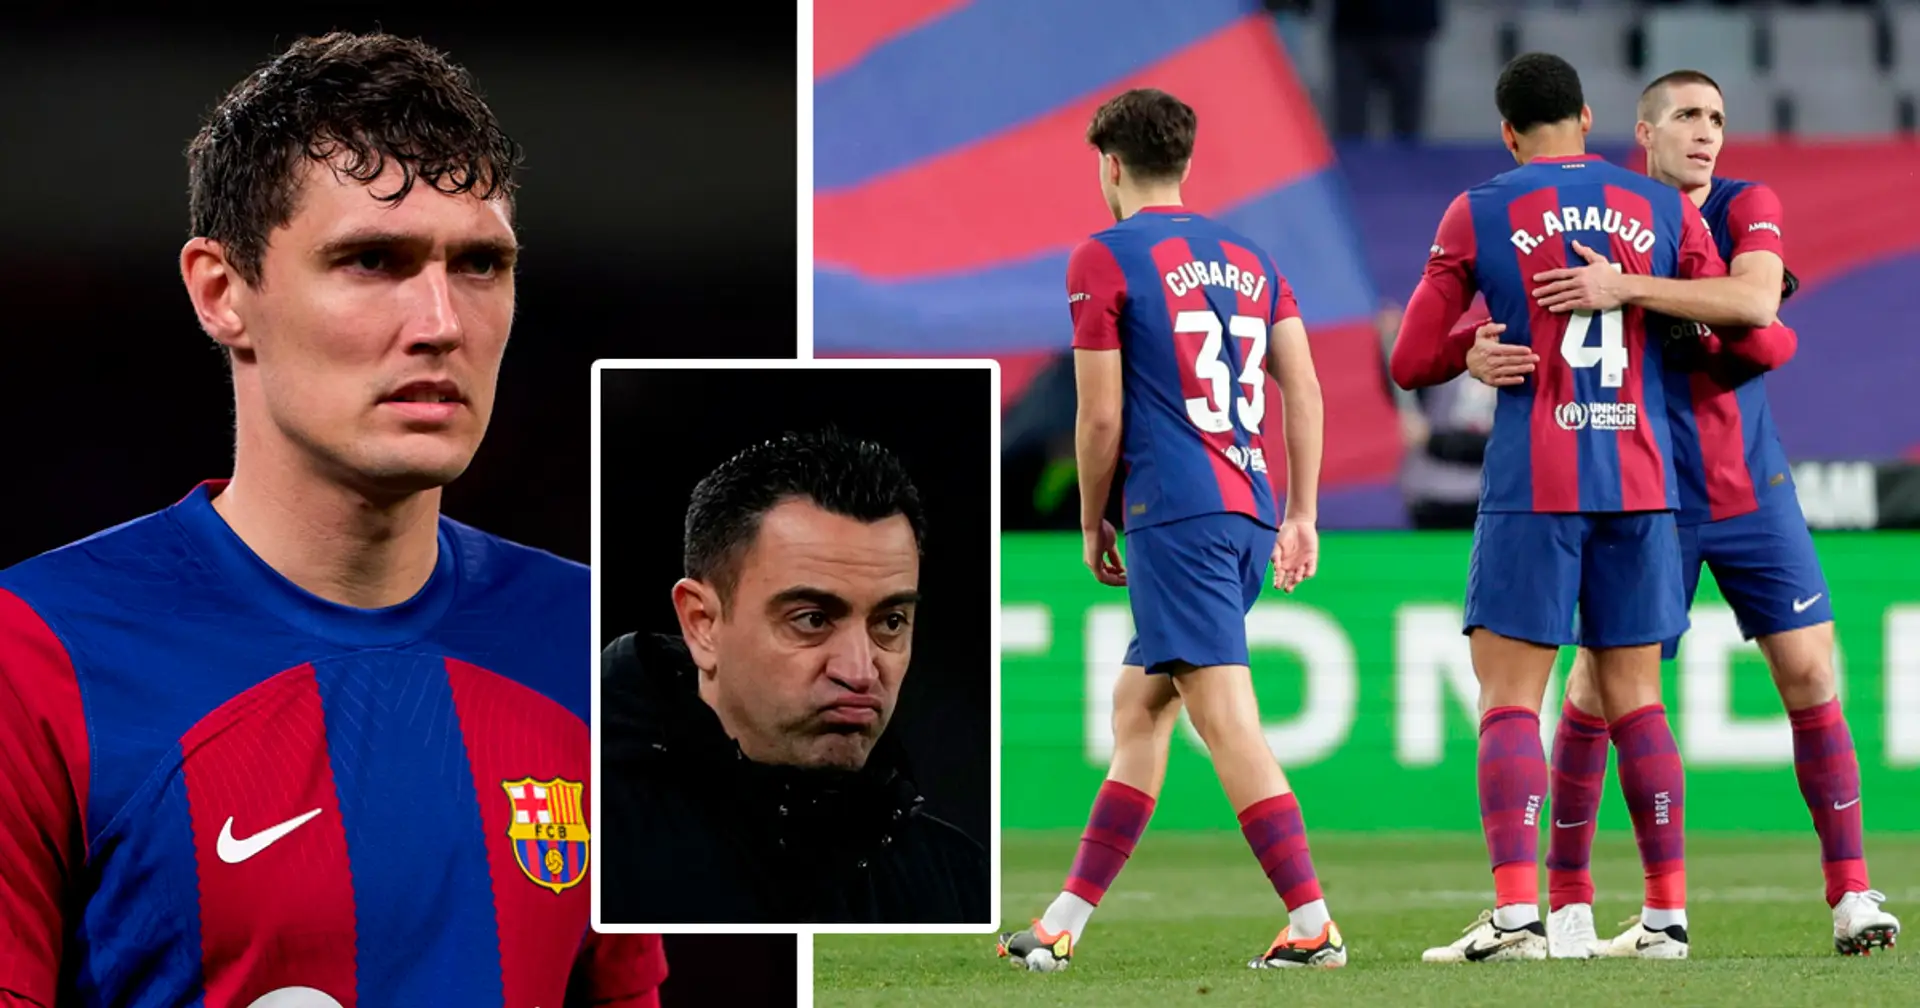 Fan suggests moving another centreback to pivot after Christensen's success - Xavi earlier said he has all the necessary qualities